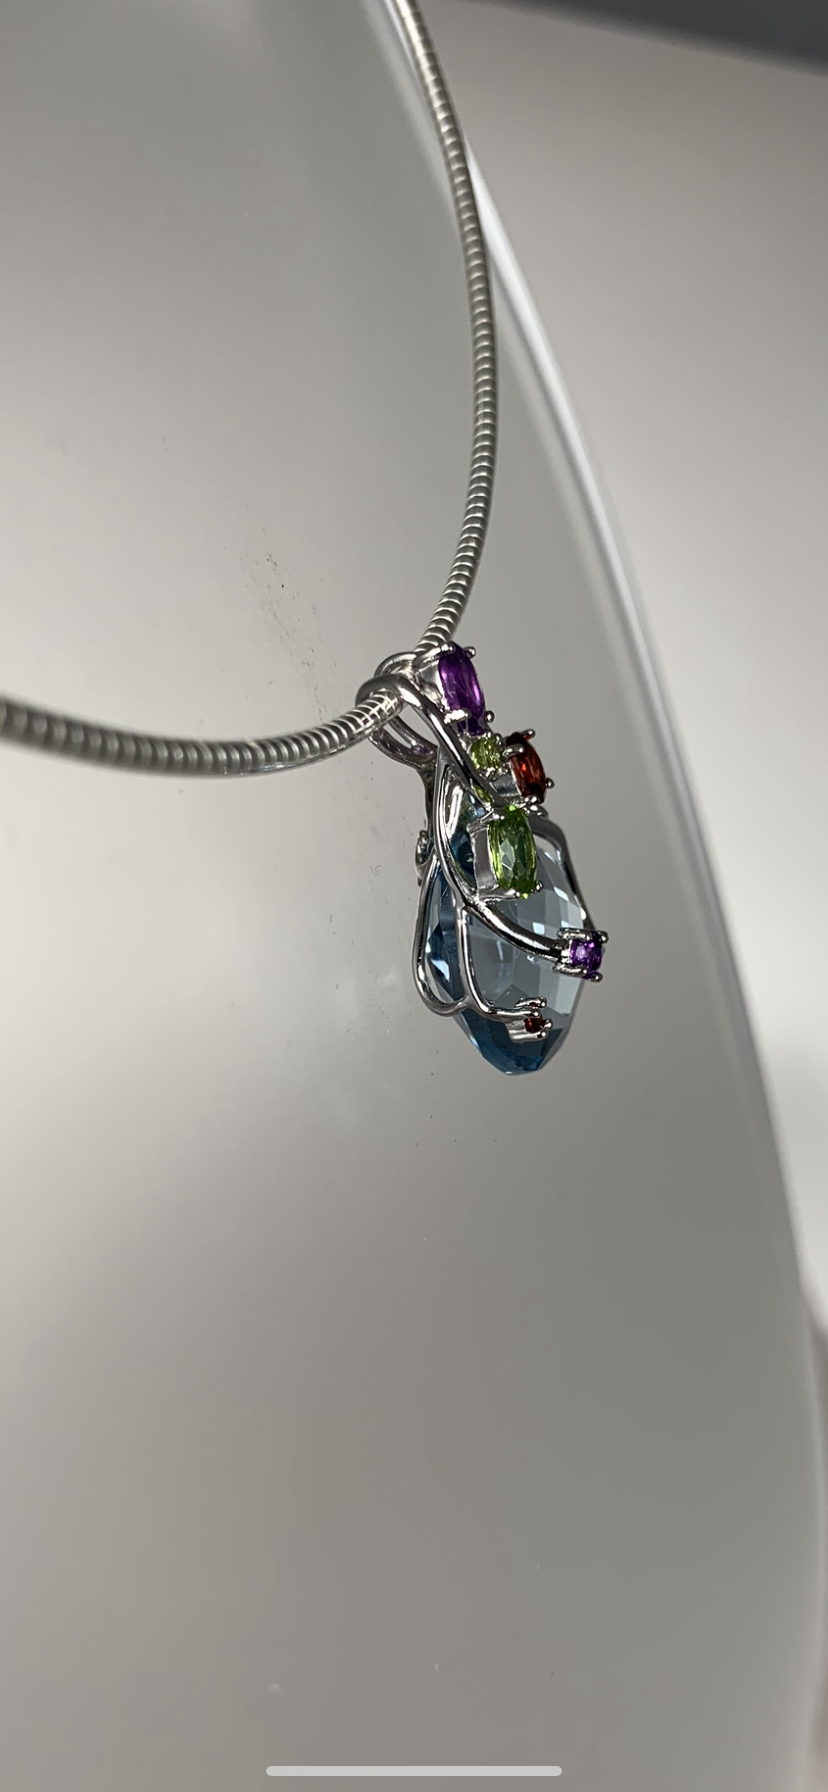 Sterling Silver and Oval Light Blue Crystal and Genuine Gems Pendant